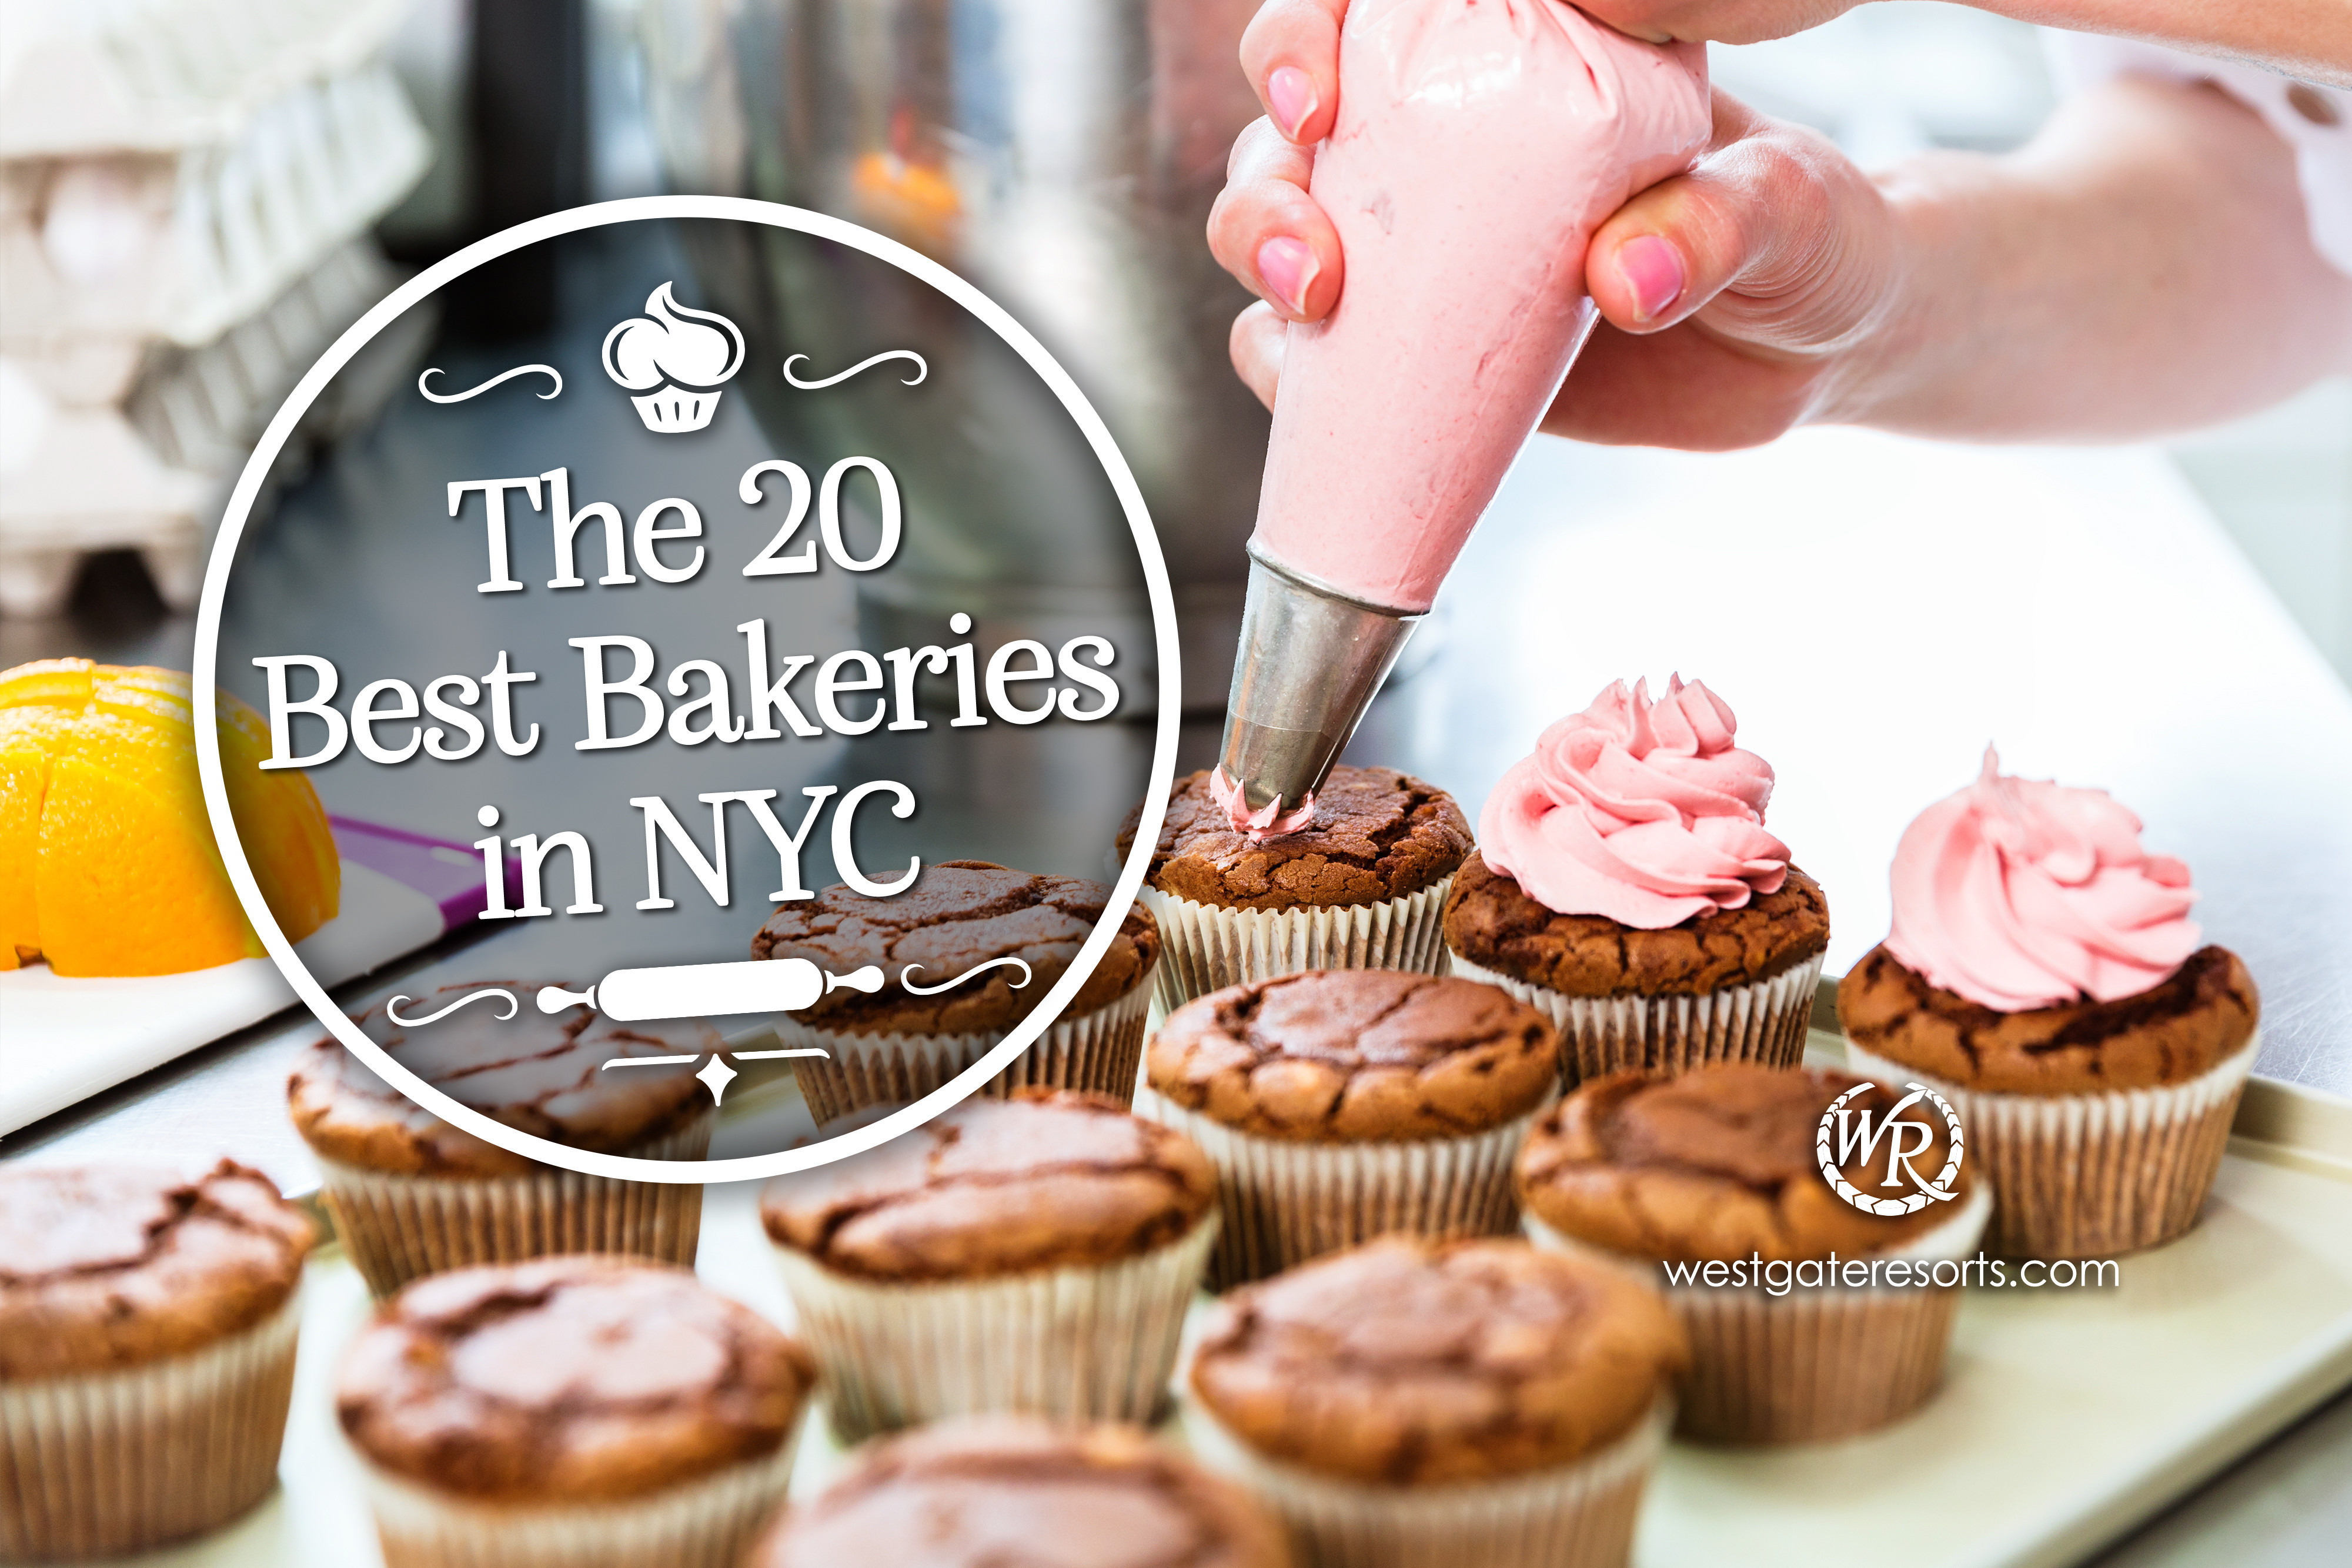 The 20 Best Bakeries in NYC